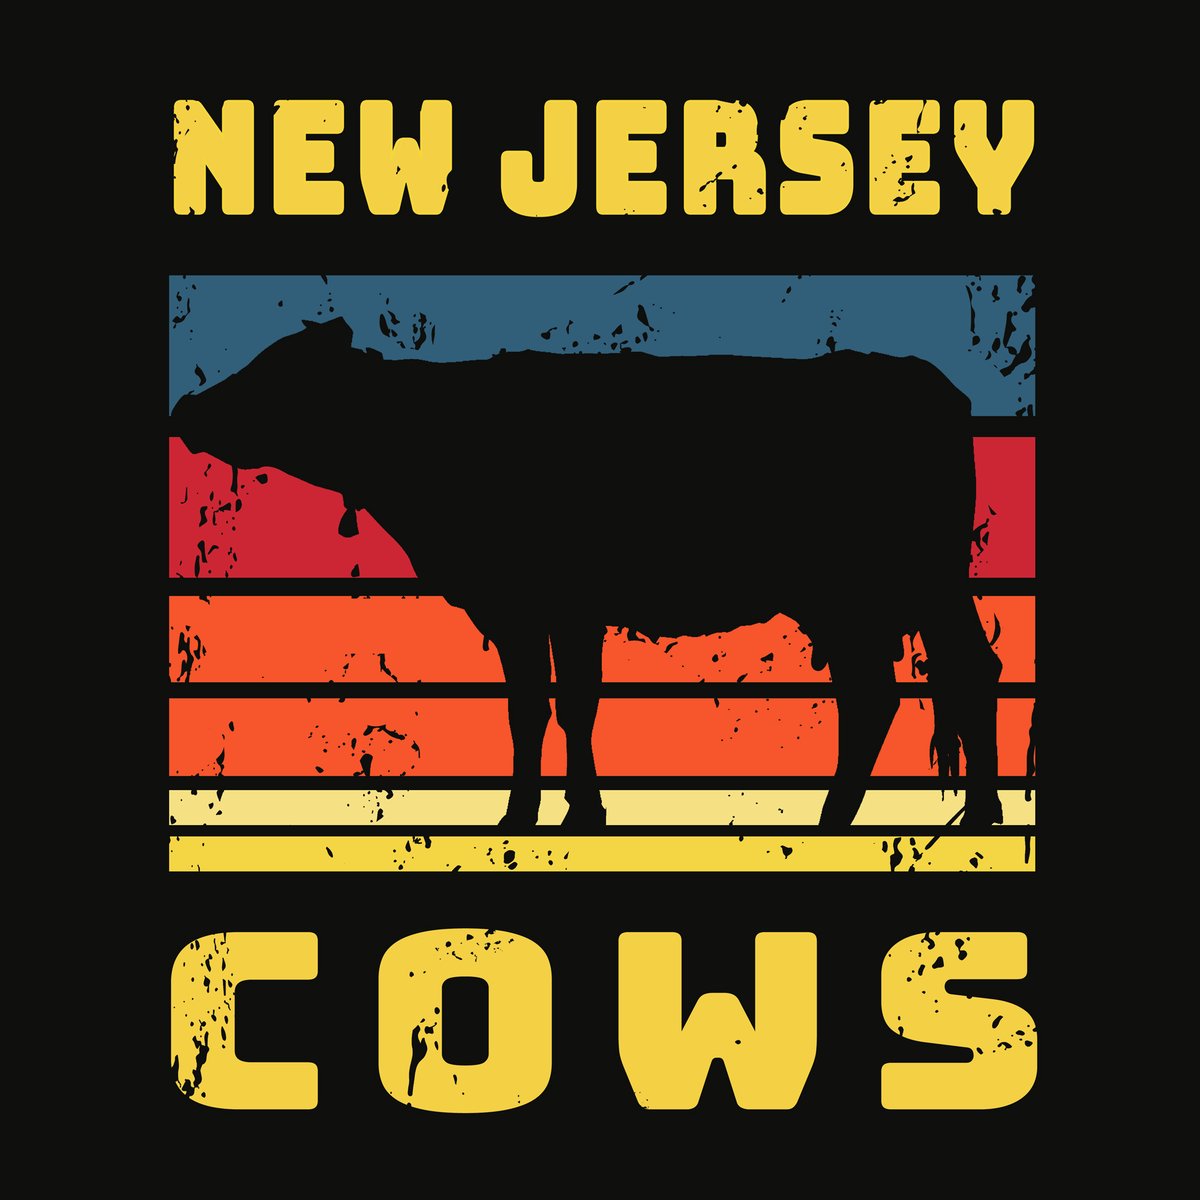 New Jersey cows are here! #njcows #newjerseycows #jerseycows #njtshirts